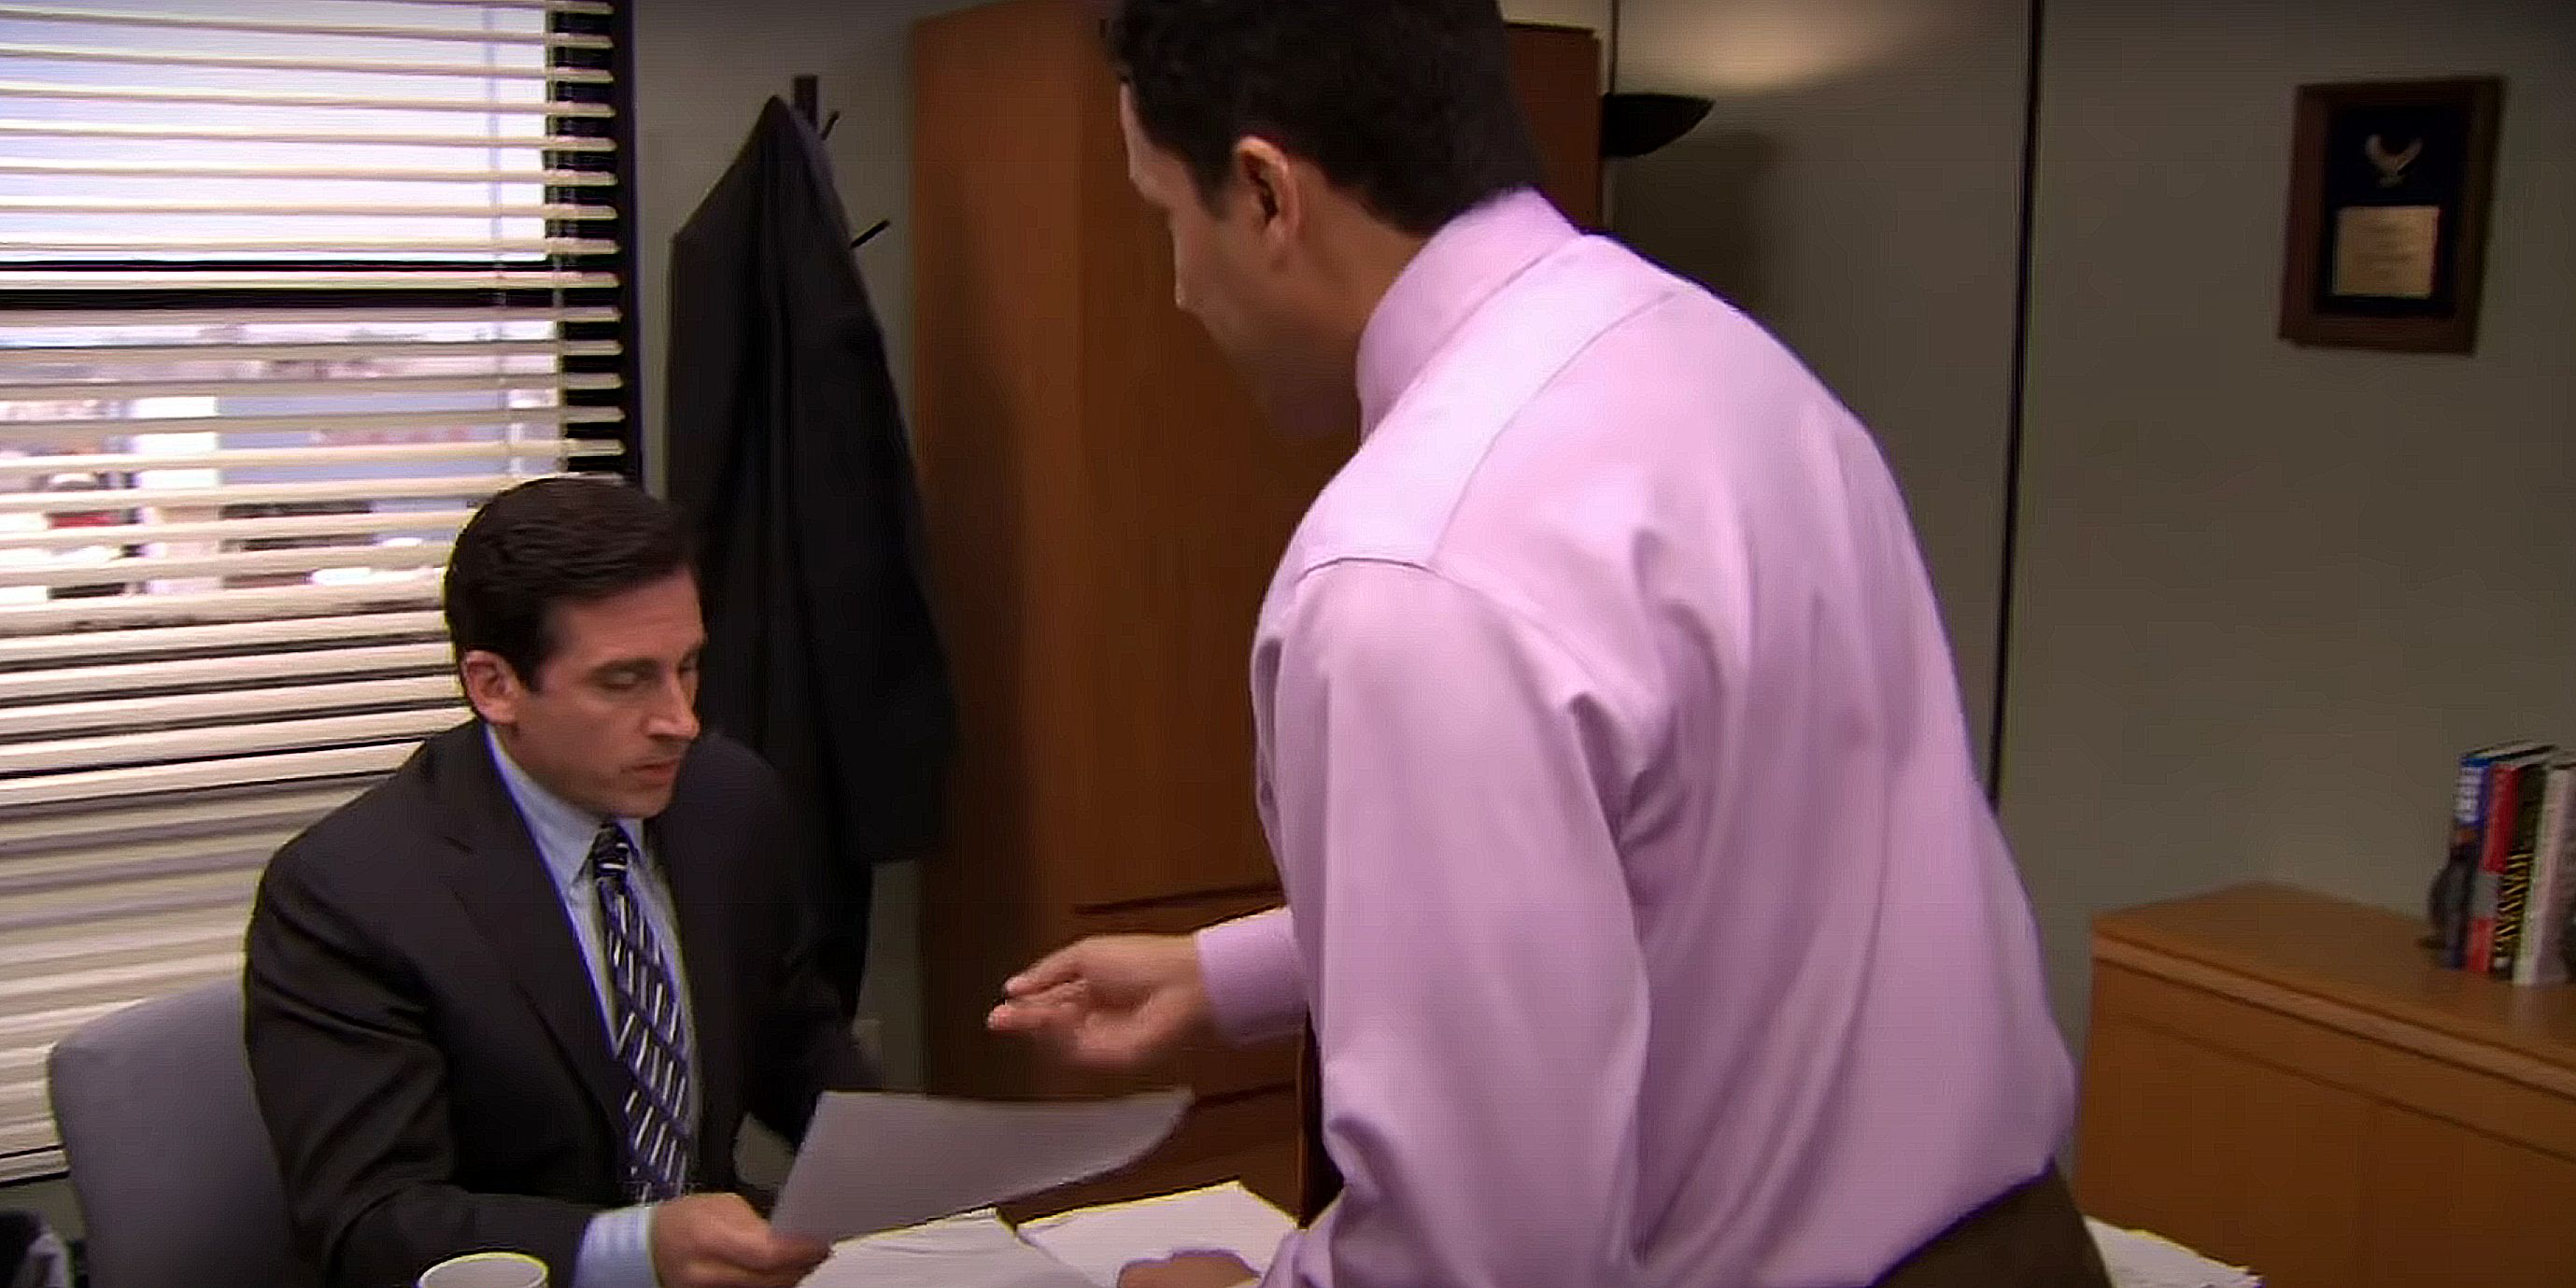 Oscar explaining a surplus to Michael in The Office.